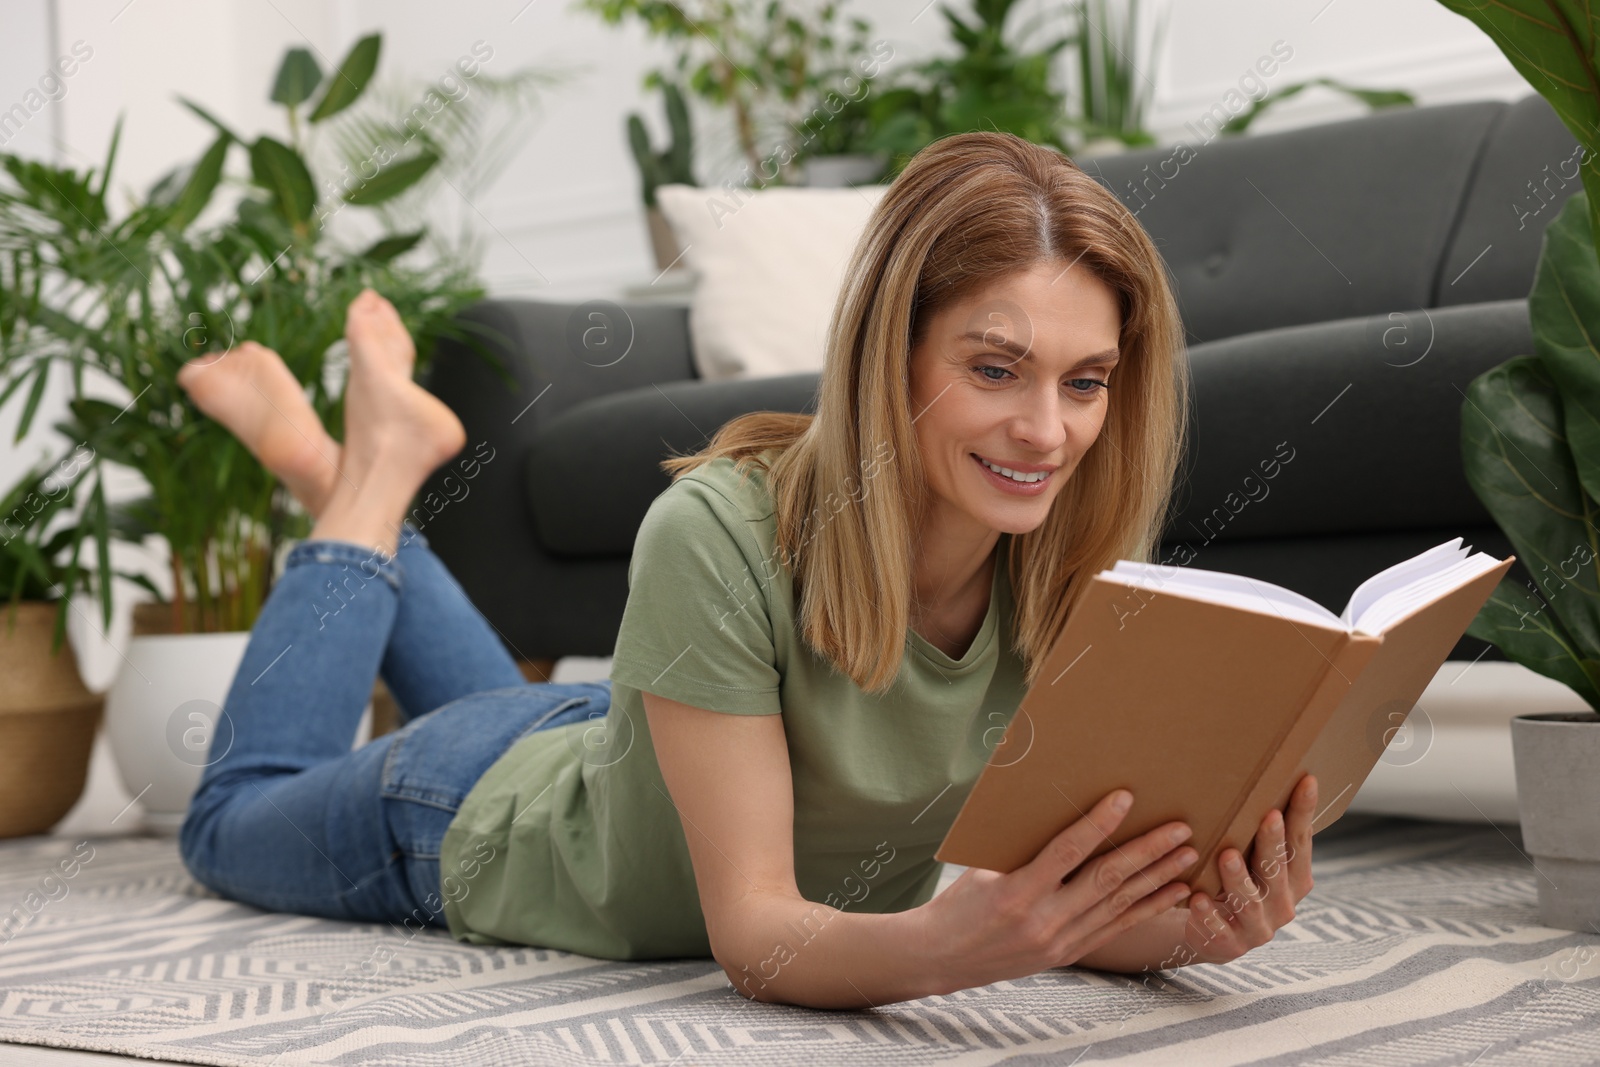 Photo of Woman reading book on floor in room with beautiful houseplants